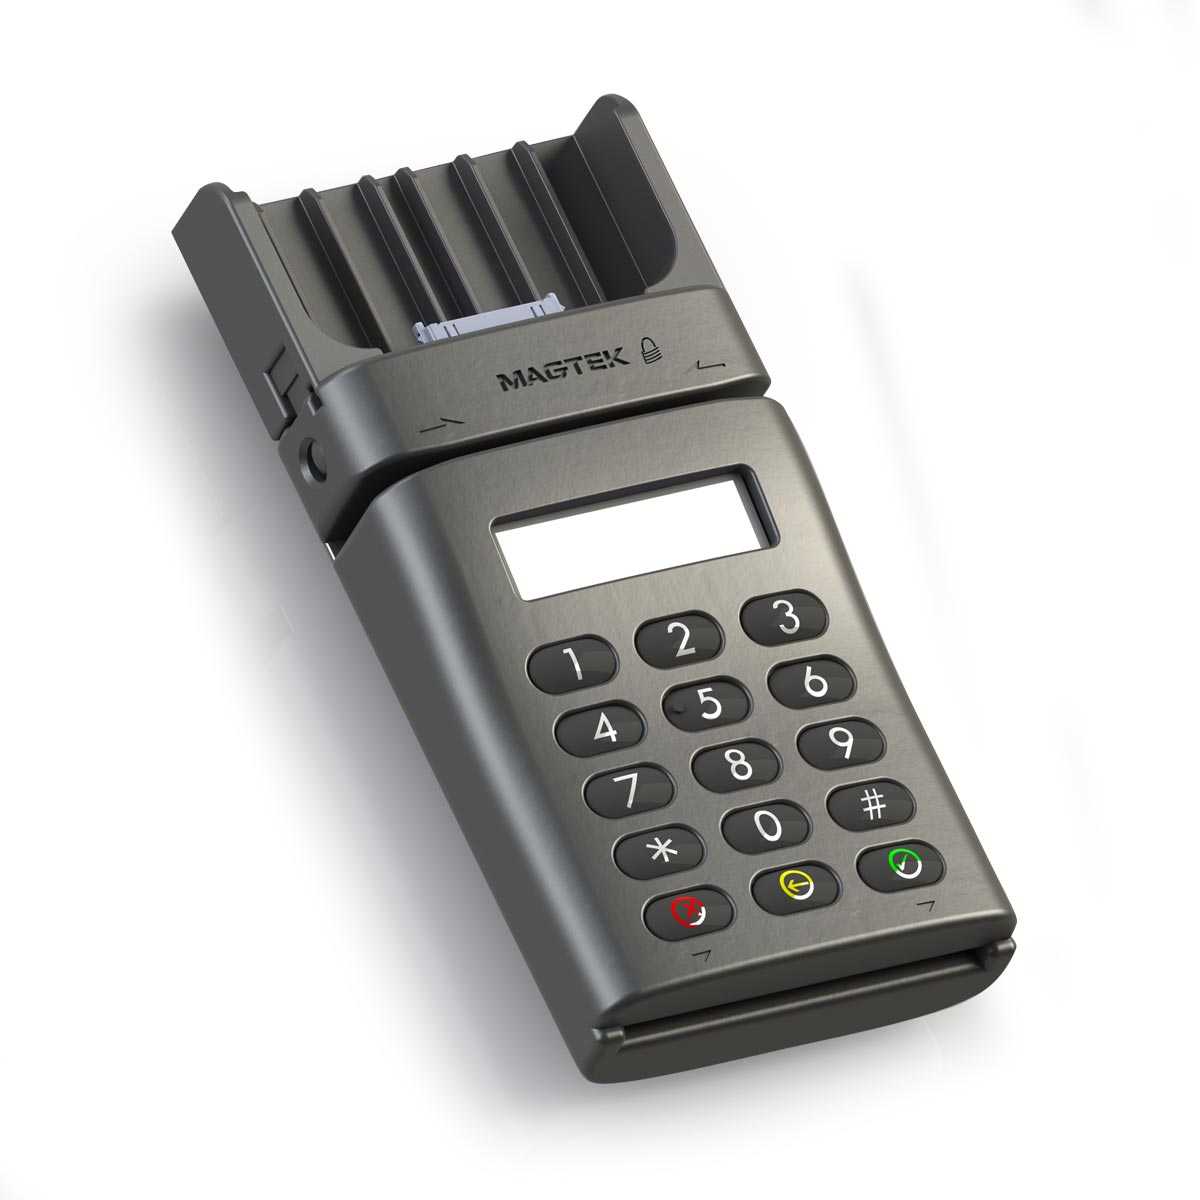 iPhone chip and pin mobile payment terminal - Magtek iDynamo EMV